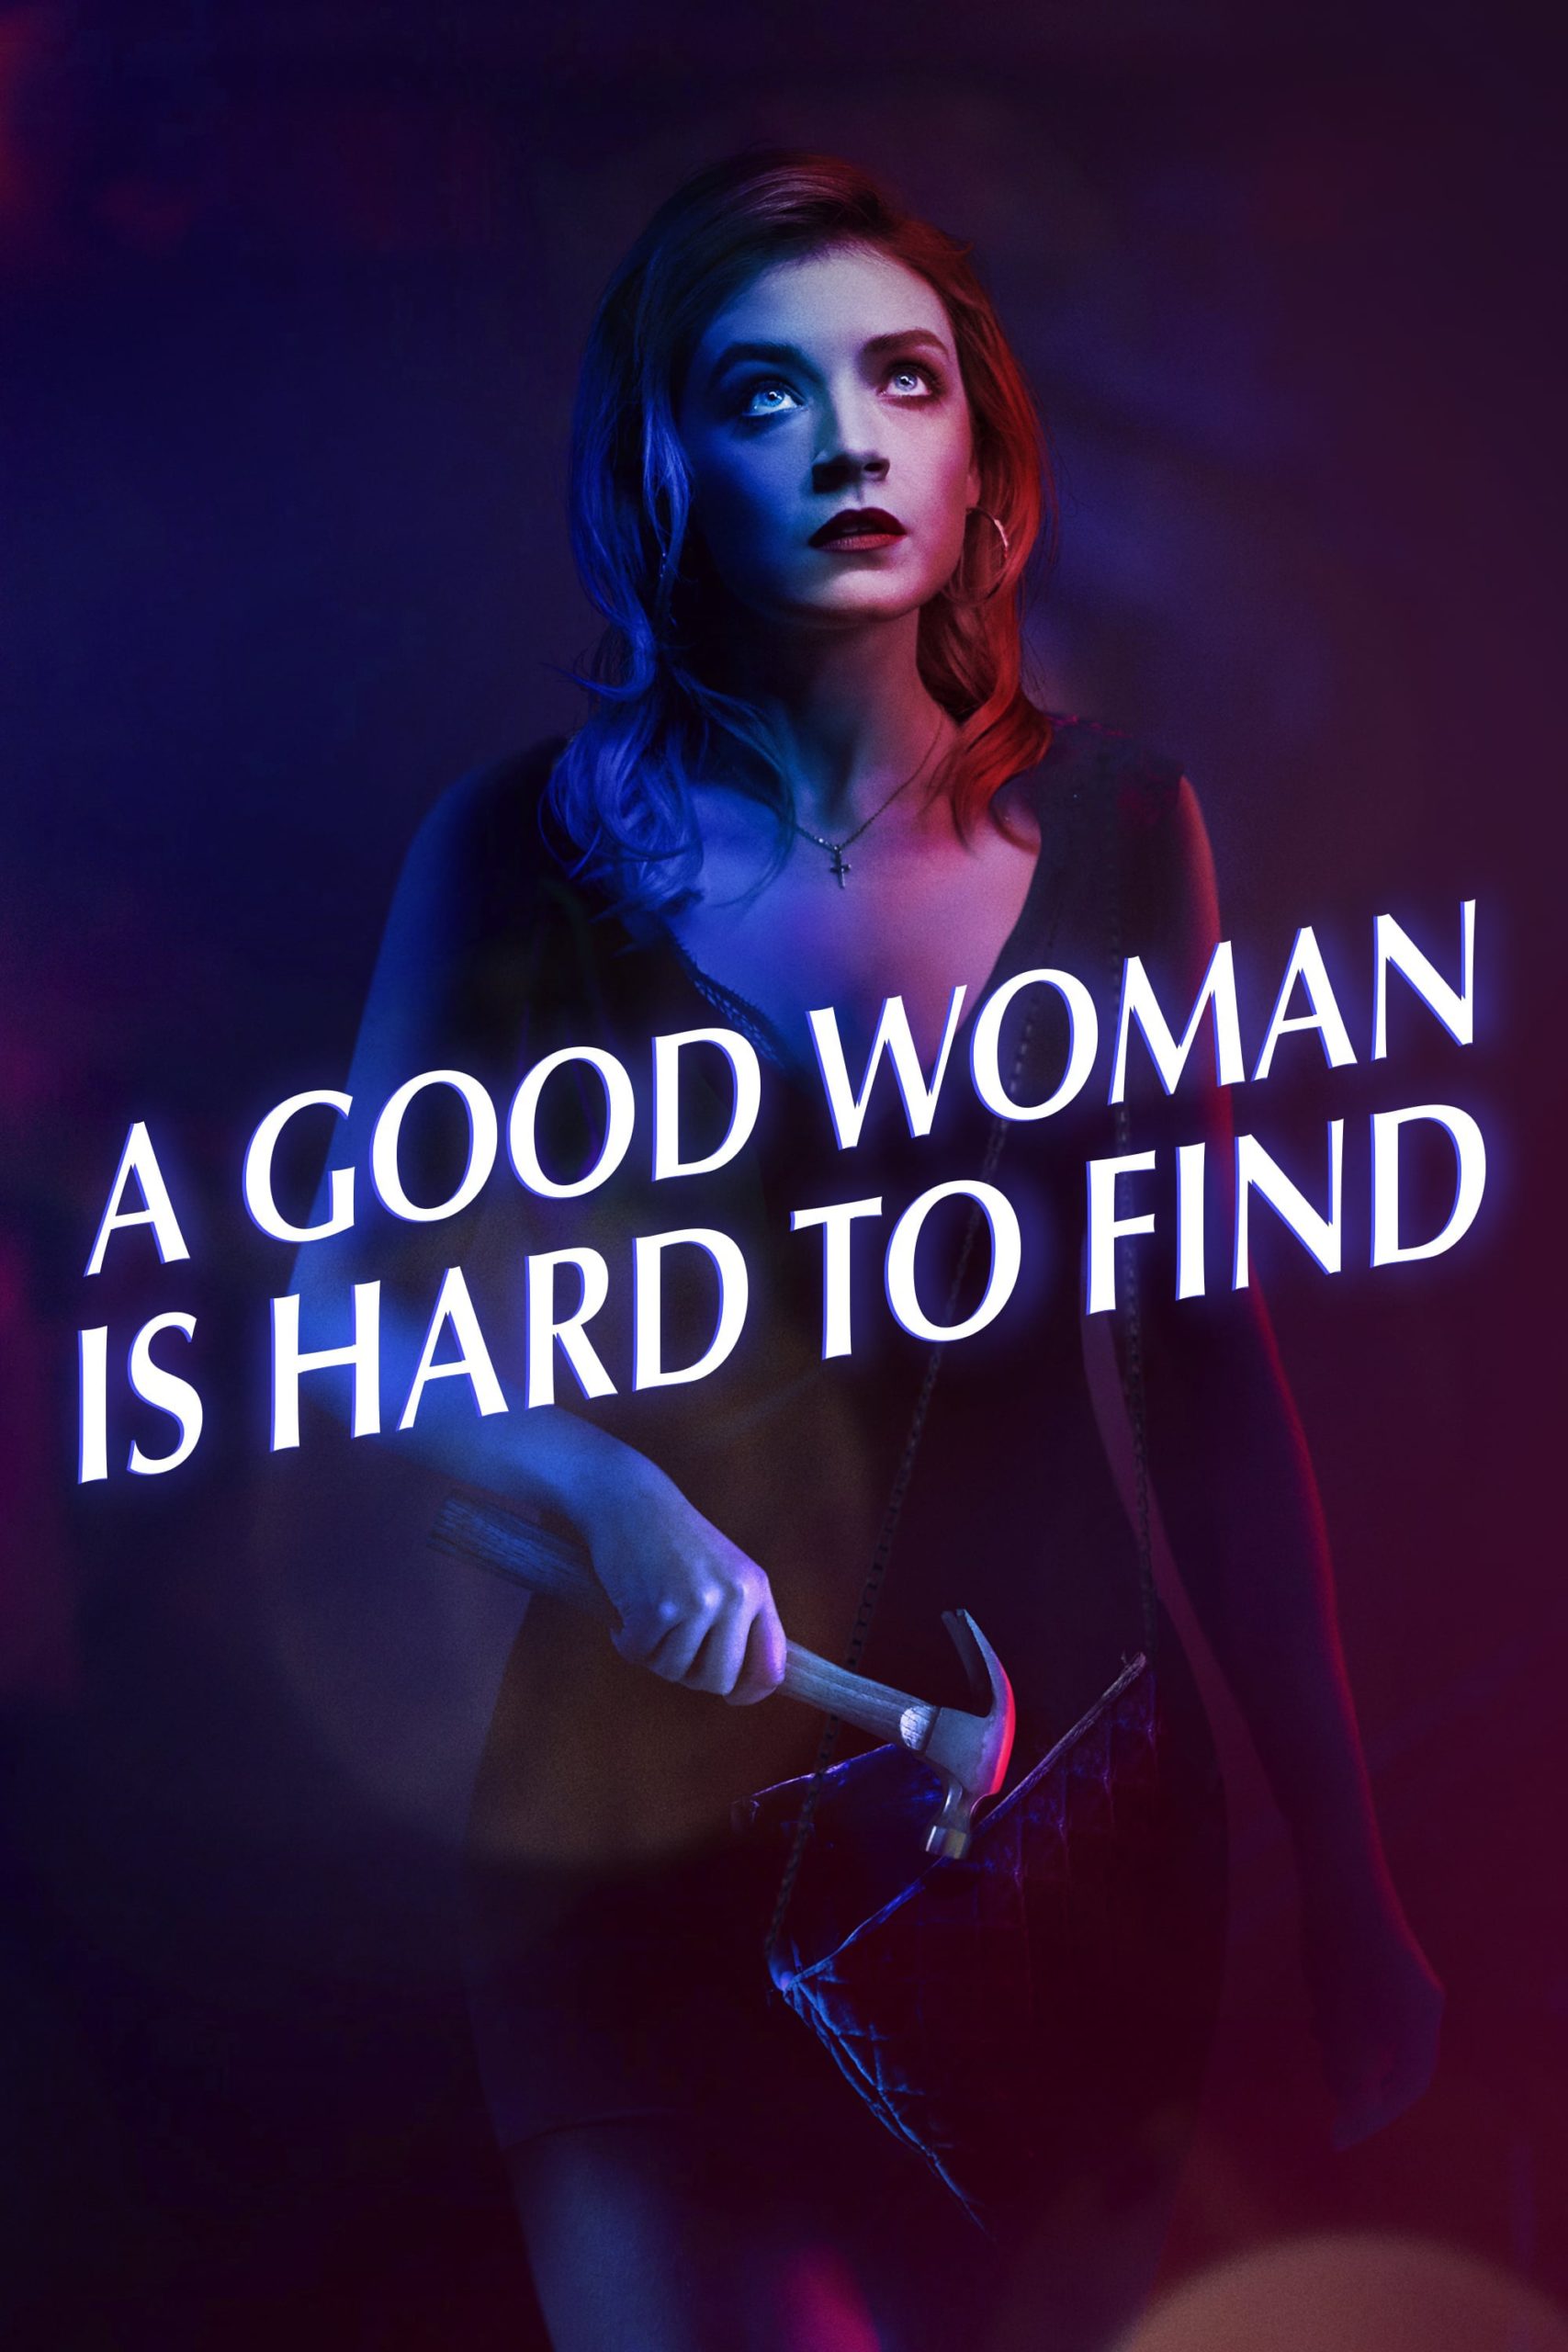 Poster for the movie "A Good Woman Is Hard to Find"